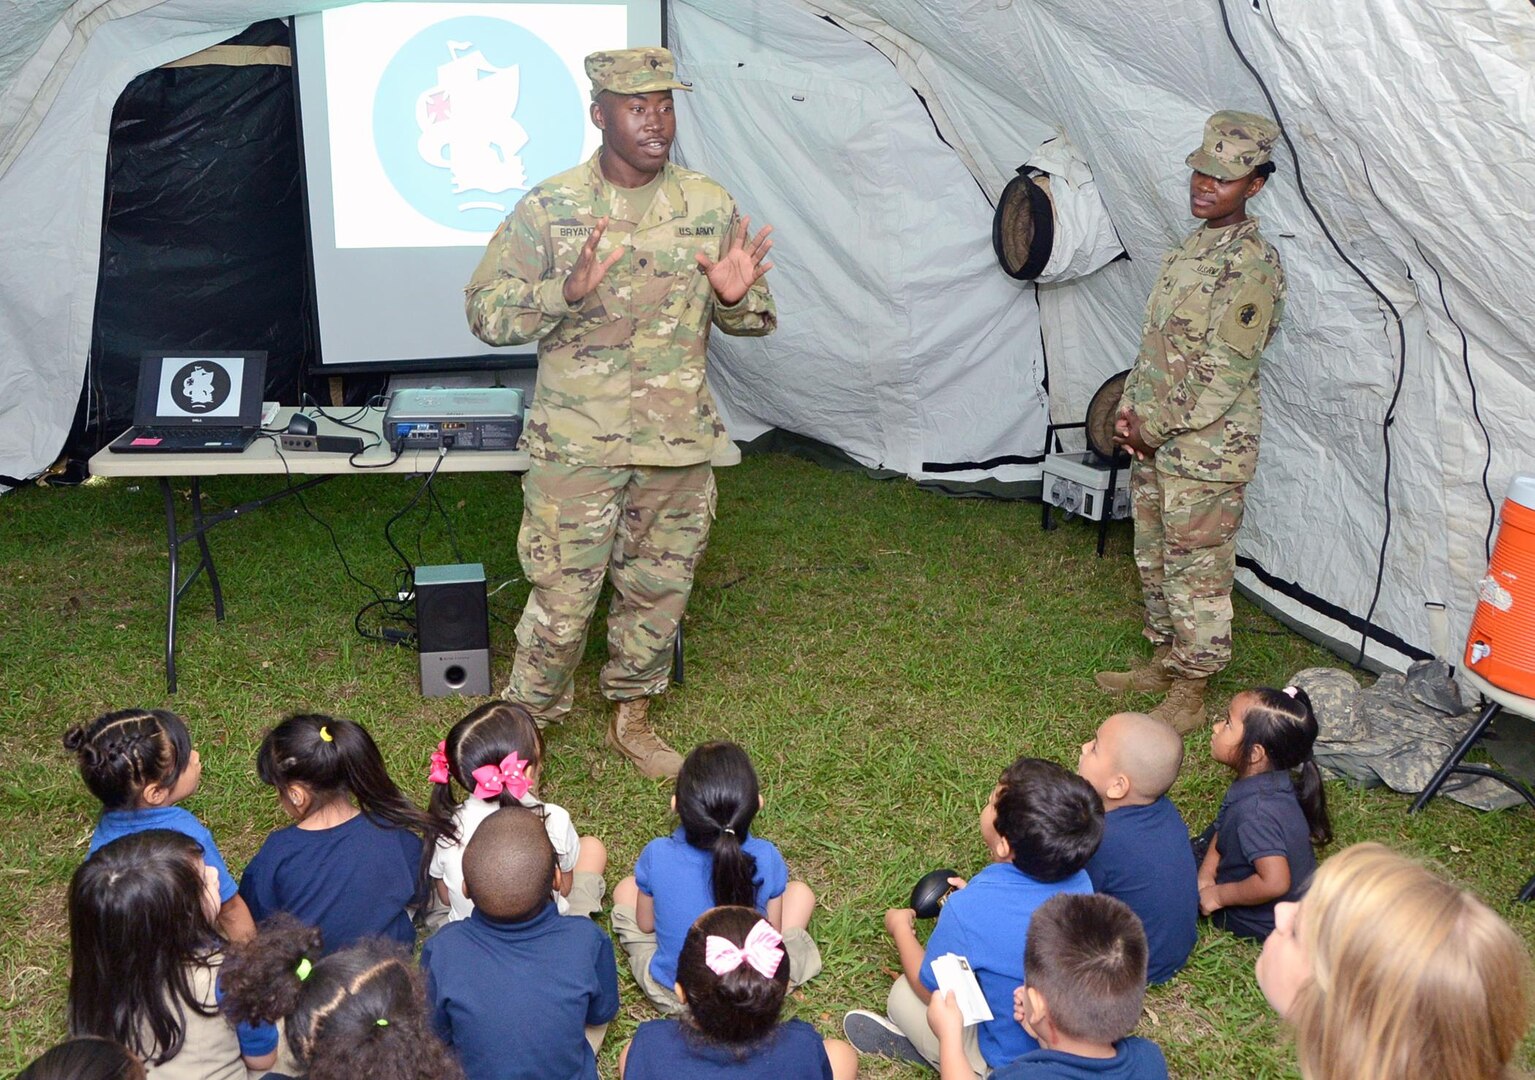 Spc. David Bryant (left) and Staff Sgt. Ashley Moore (right), Headquarters and Headquarters Battalion, U.S. Army South at Joint Base San Antonio-Fort Sam Houston, answer questions from students at Booker T. Washington Elementary School, during the school’s career day May 26.  The school and unit are partnered through the Adopt-a-School program. Units on JBSA-Fort Sam Houston are partnered with schools with the Northeast Independent School District, the San Antonio Independent School District and the Fort Sam Houston Independent School District. Throughout the year, Soldiers partner with their designated school and provide mentorship to students as well as assist with career days, field trips and many other activities.